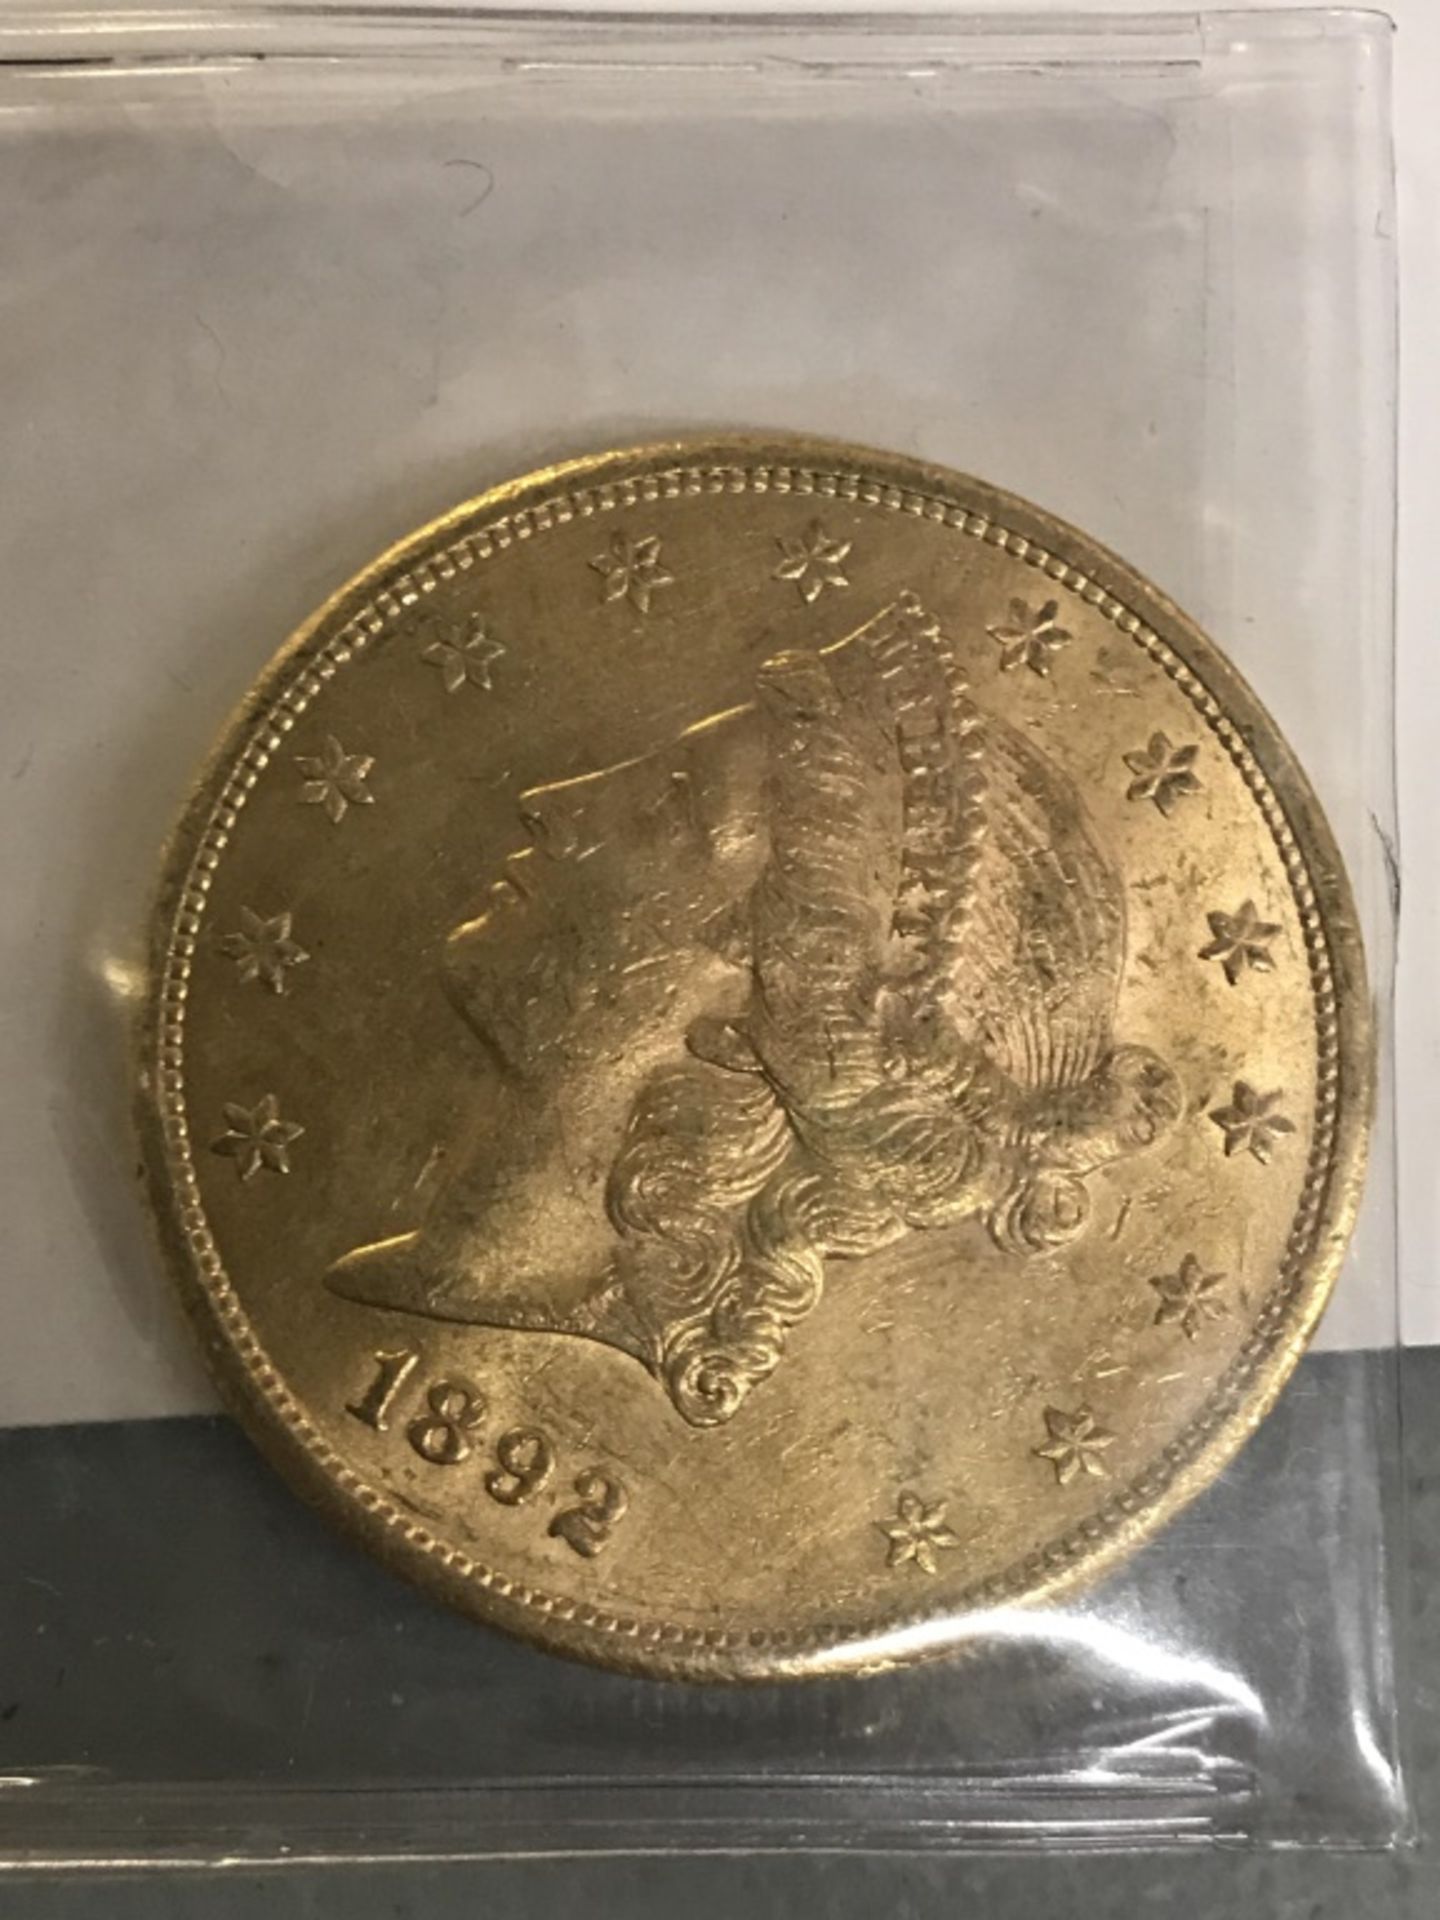 $20 Us Gold 1892 Coin - Image 5 of 9